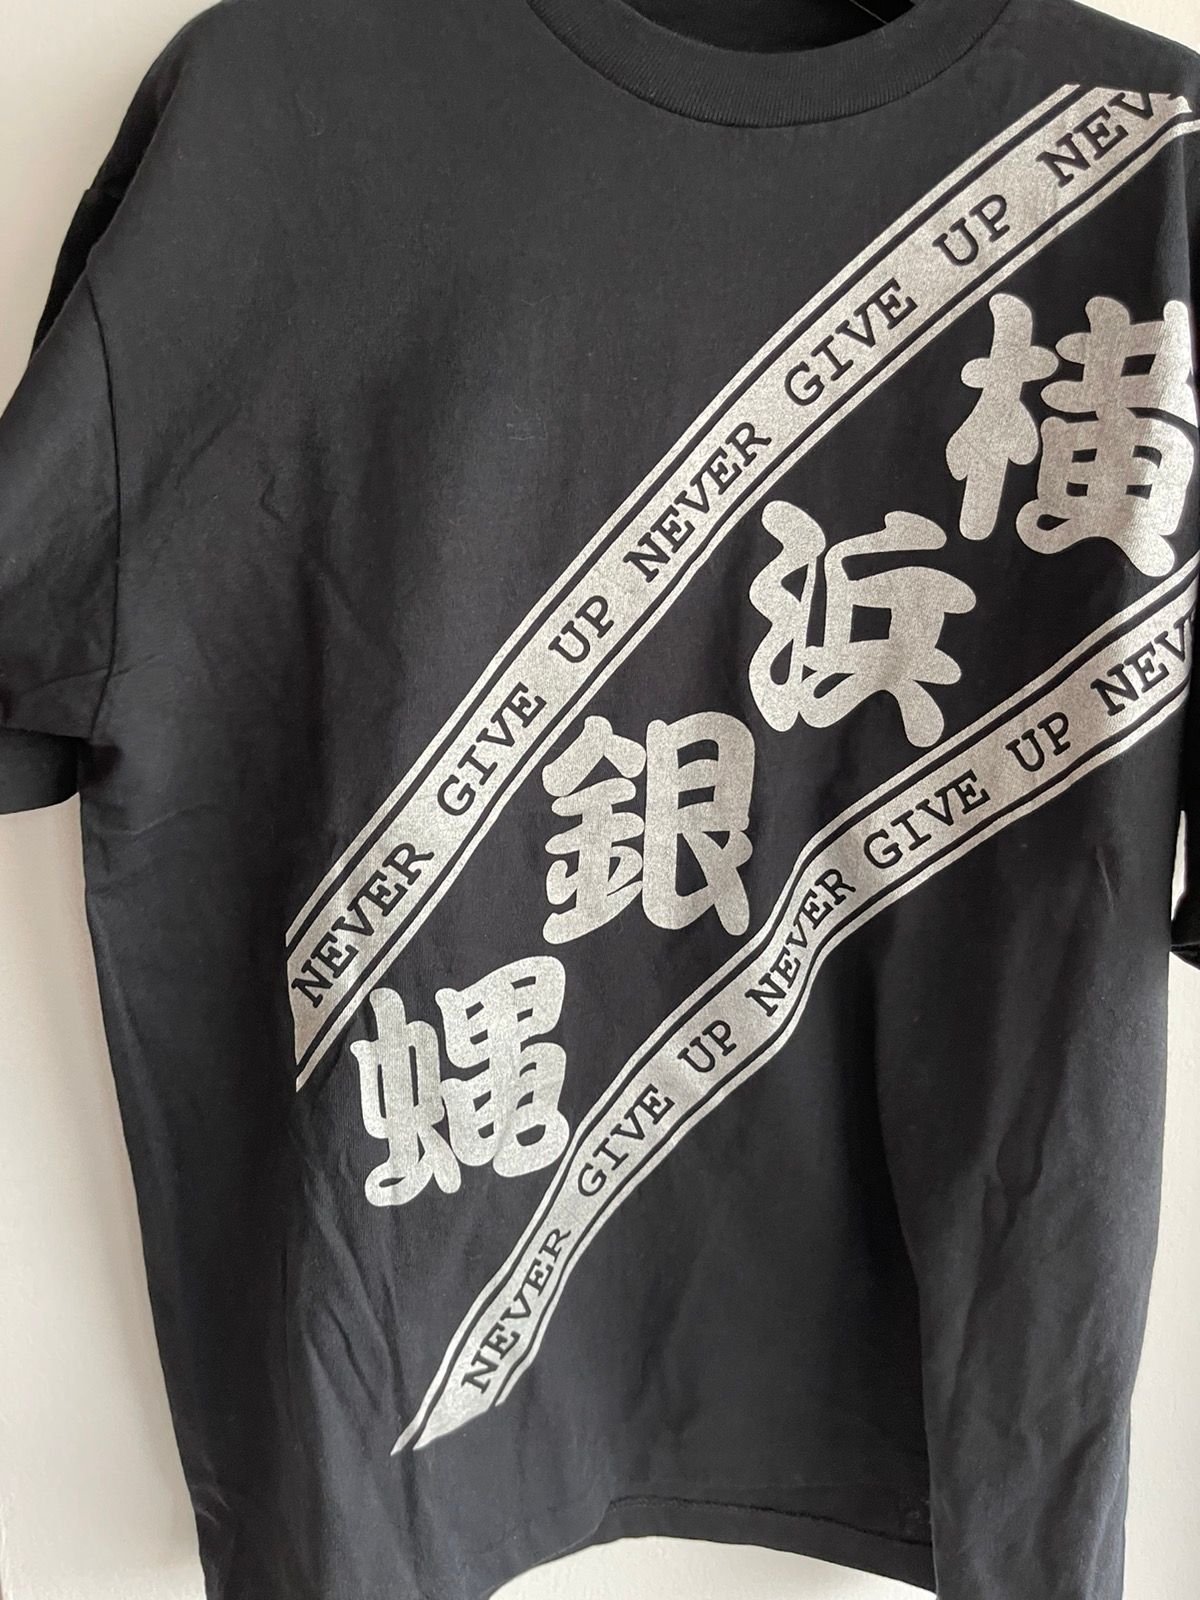 Vintage 2000s Chinnese NEVER GIVE UP Shirt